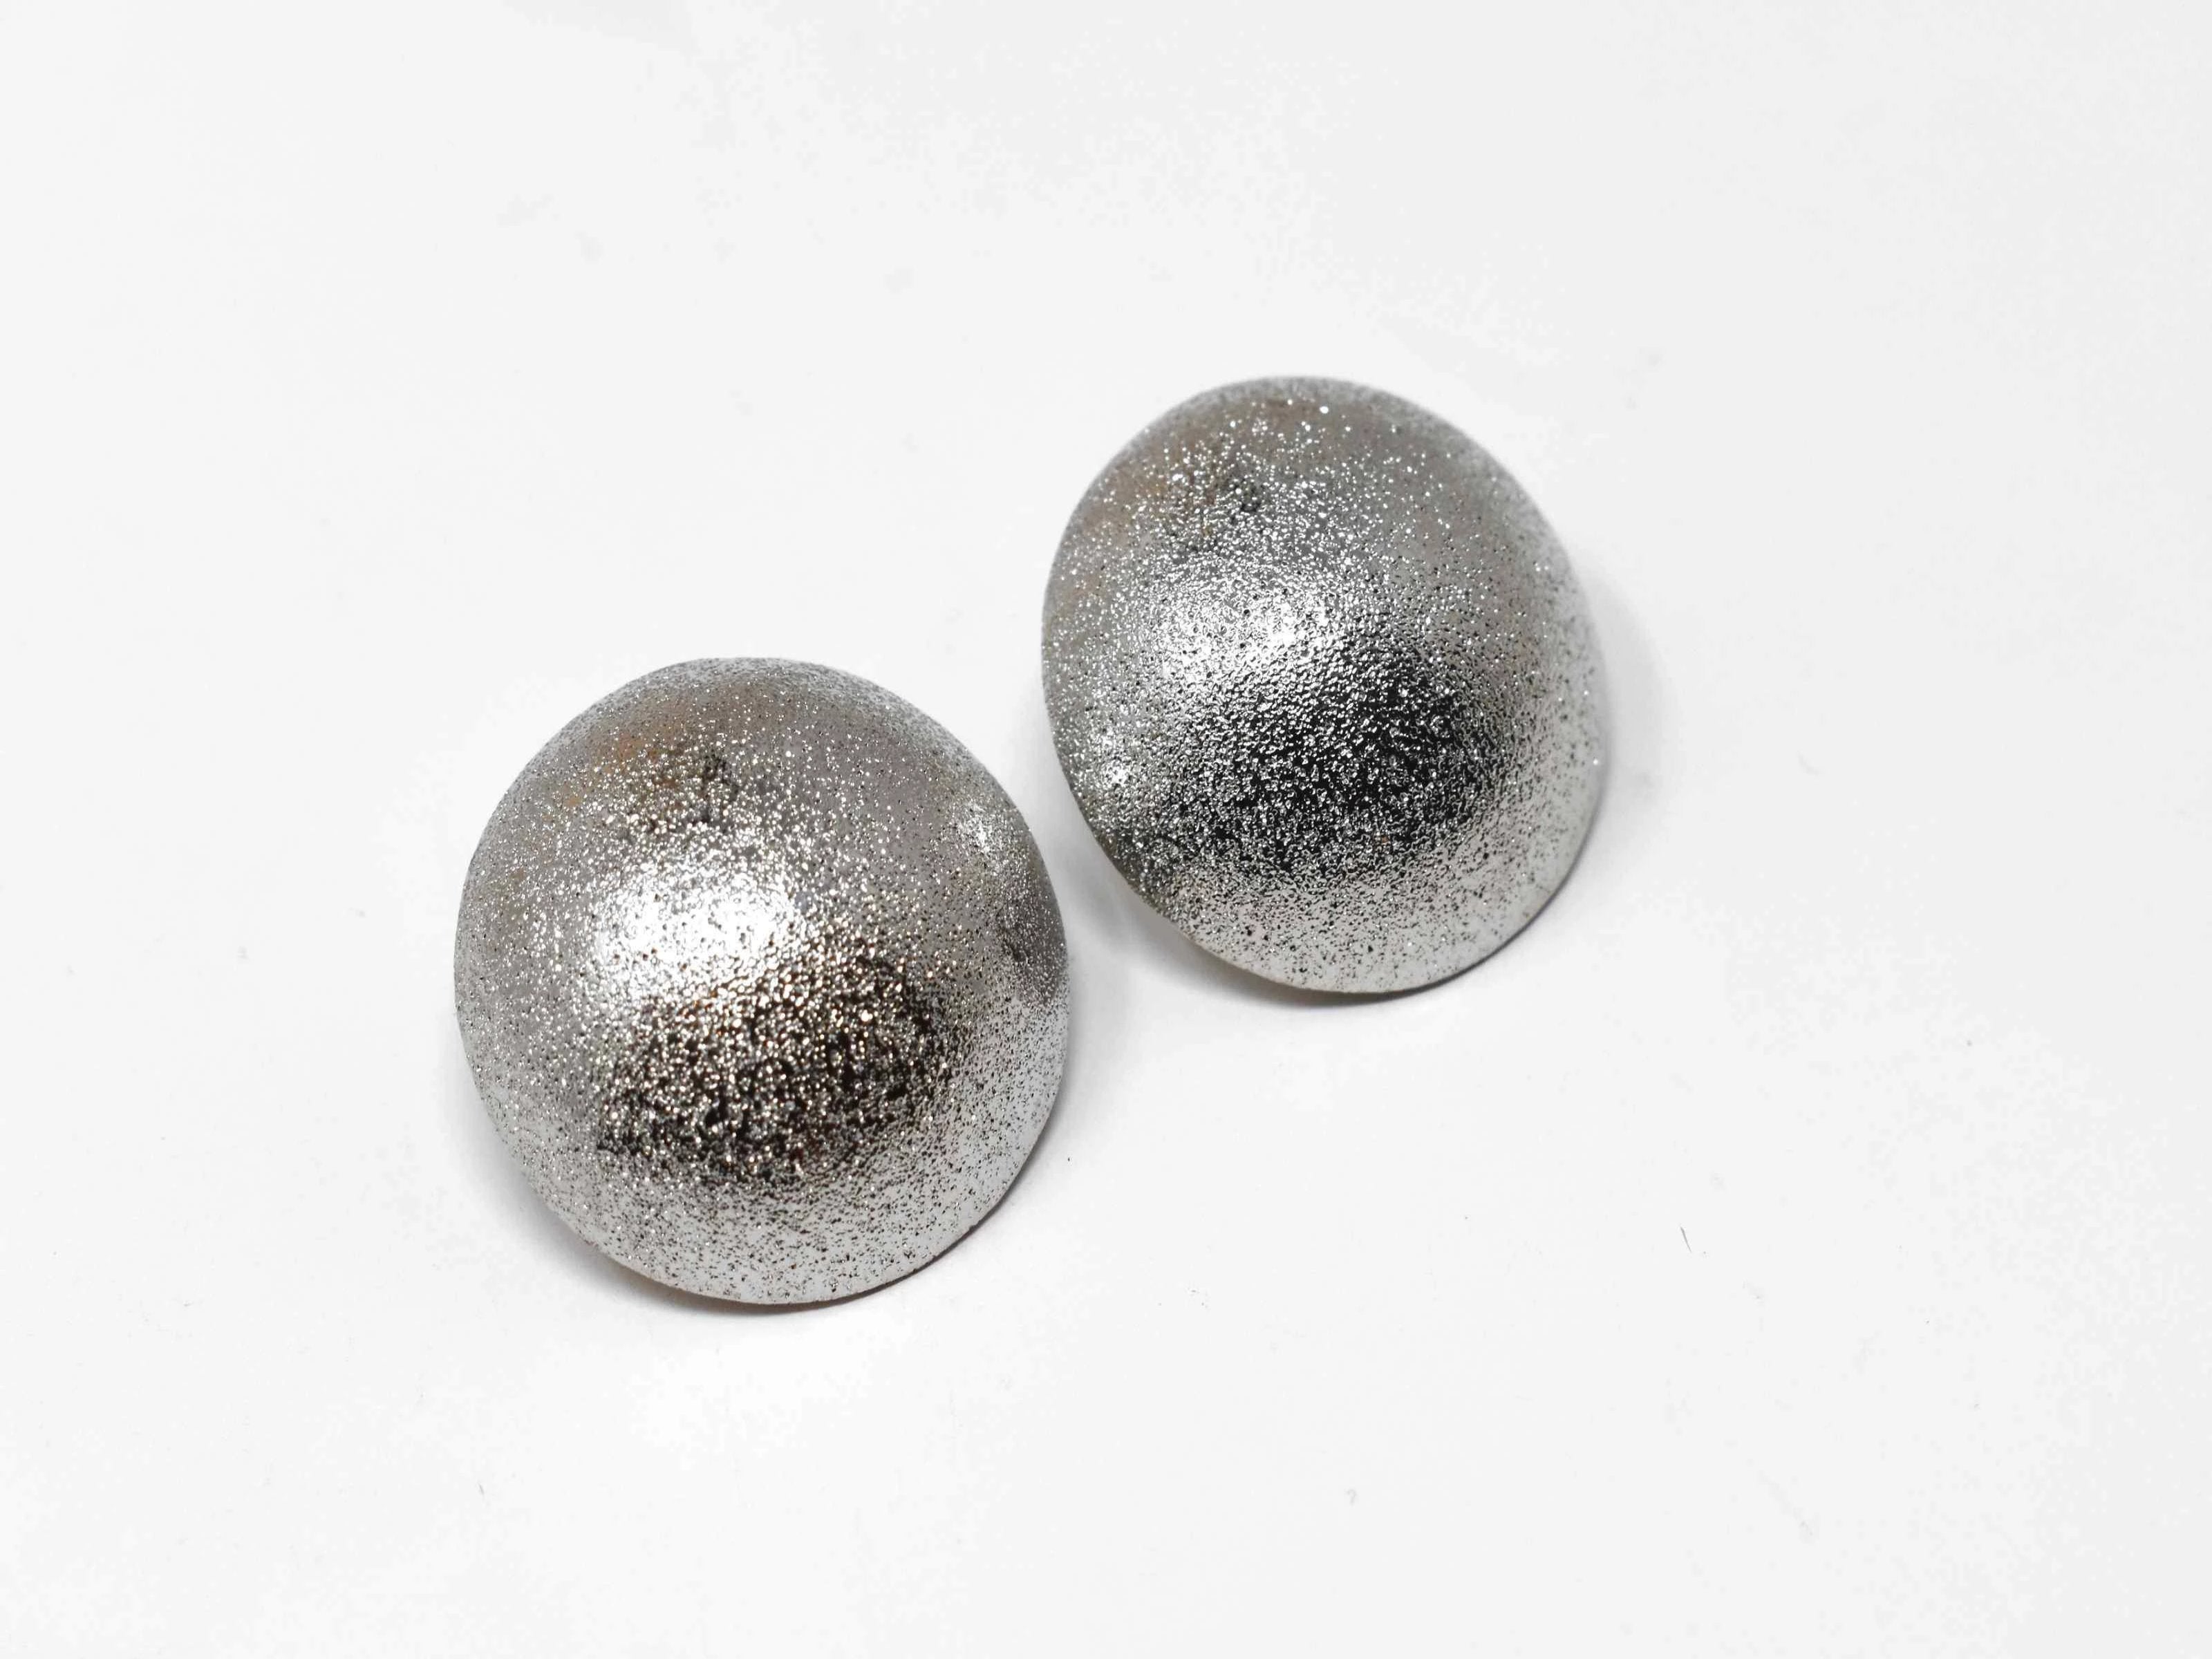 Brilliantly versatile are the words you would use to describe our Heather knob earrings. These matte stardust earrings are medium sized knob earrings with a pushback design.